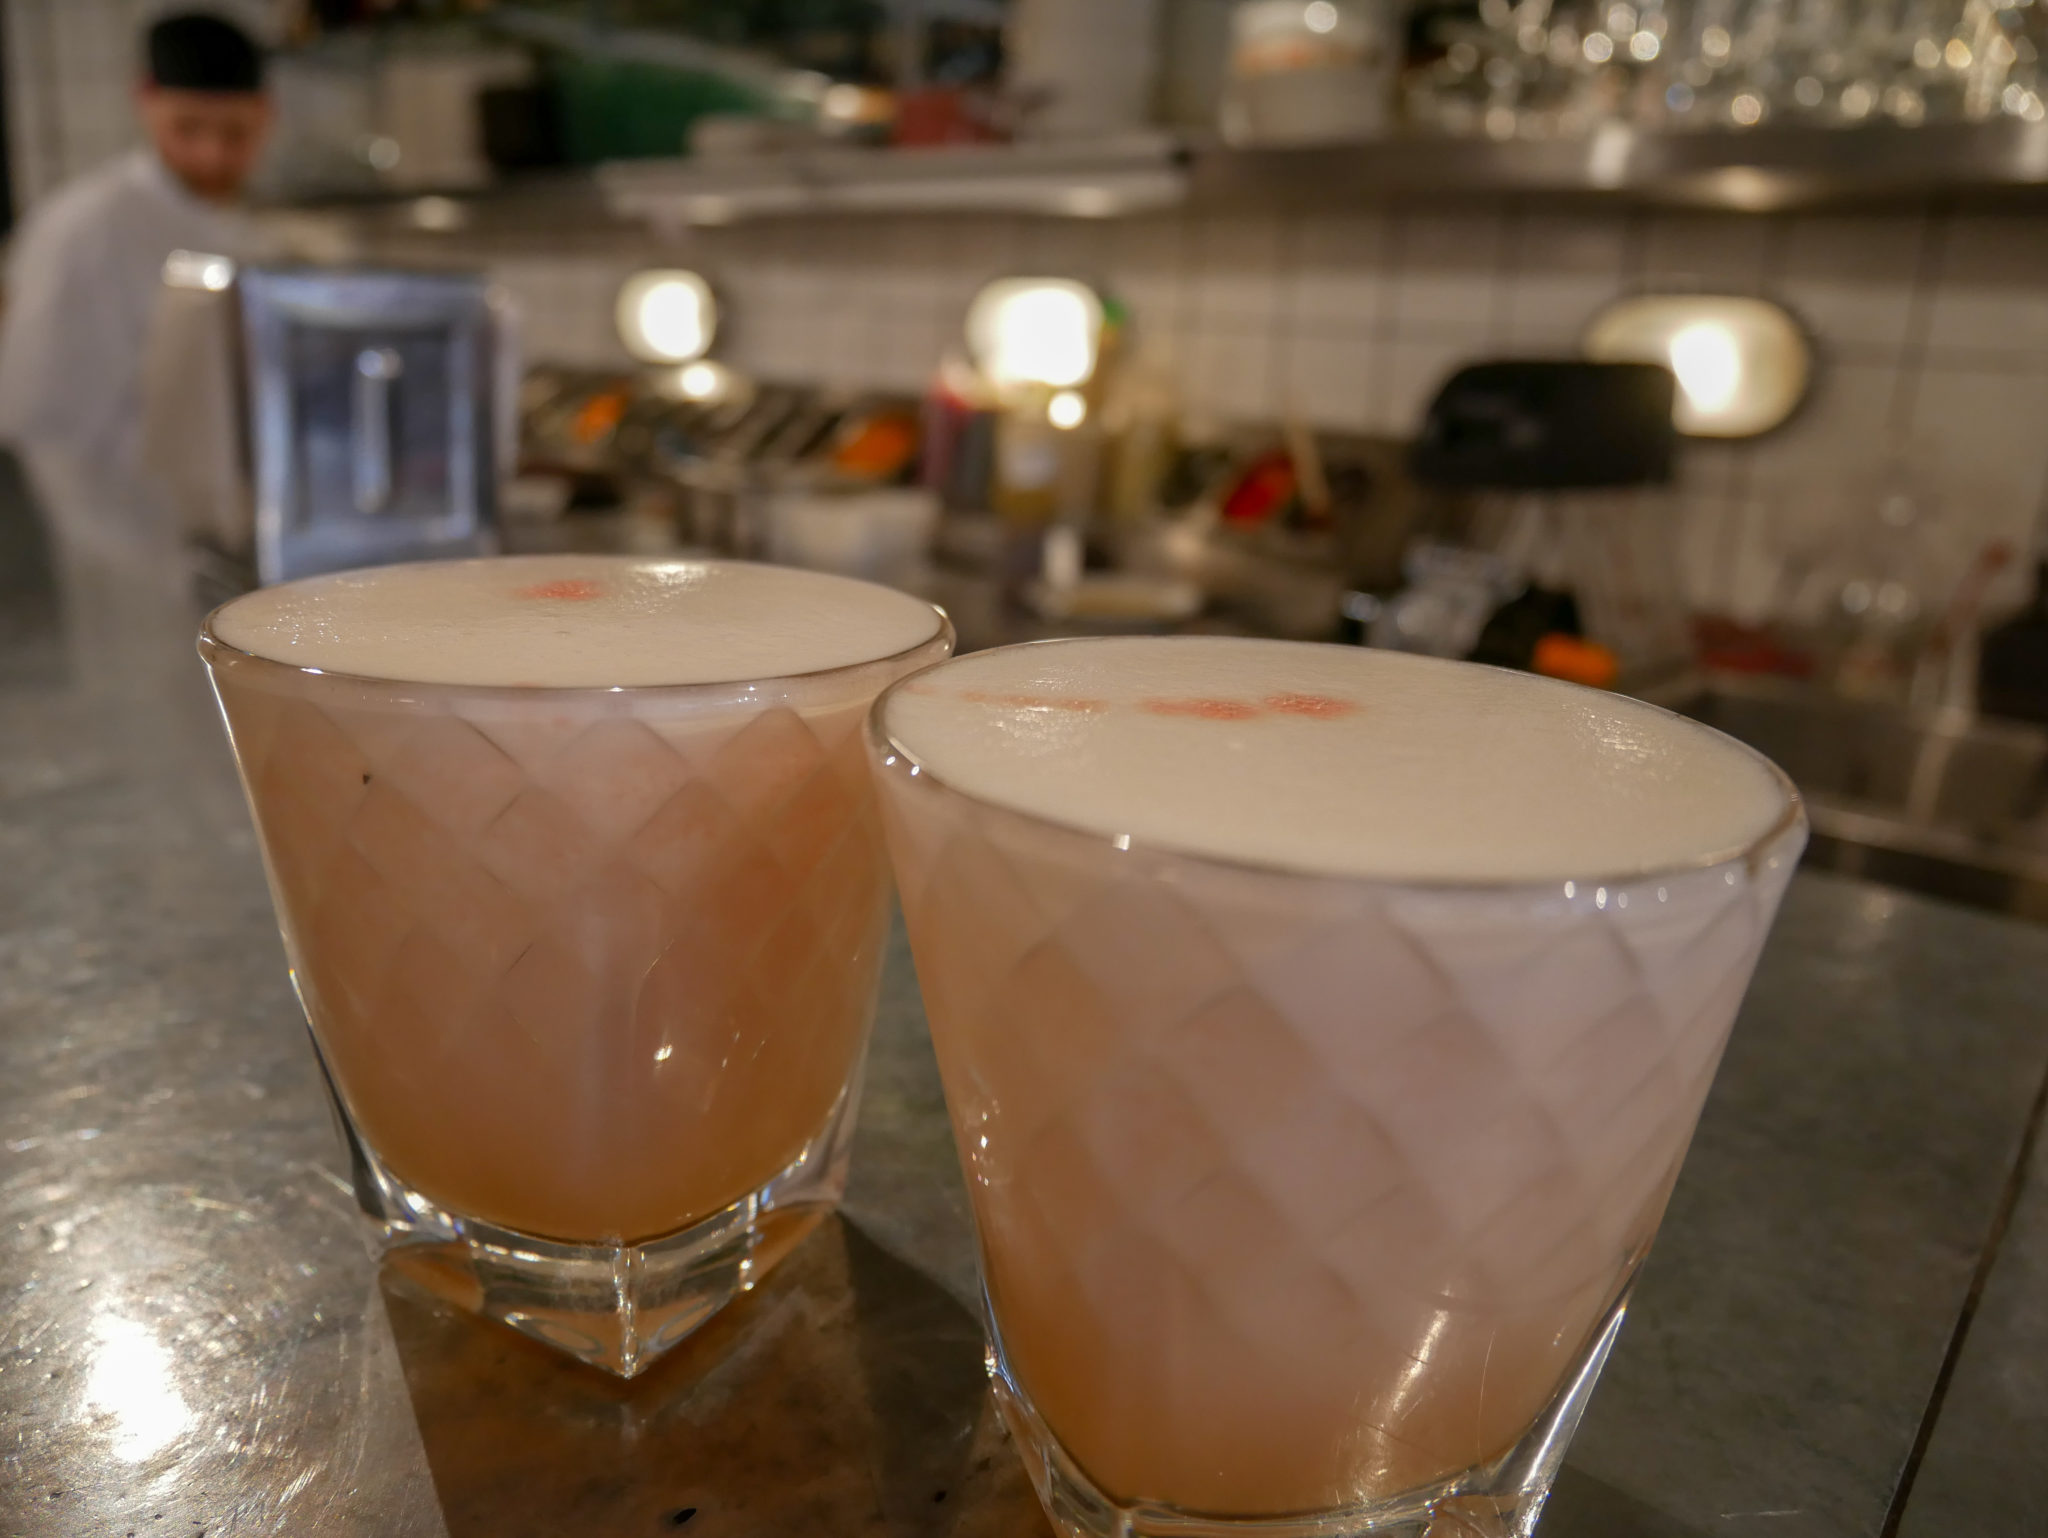 2 tumblers of pink pisco based foamy coctail on the counter in front of the open kitchen at Ceviche Peruvian restaurant, Soho, London